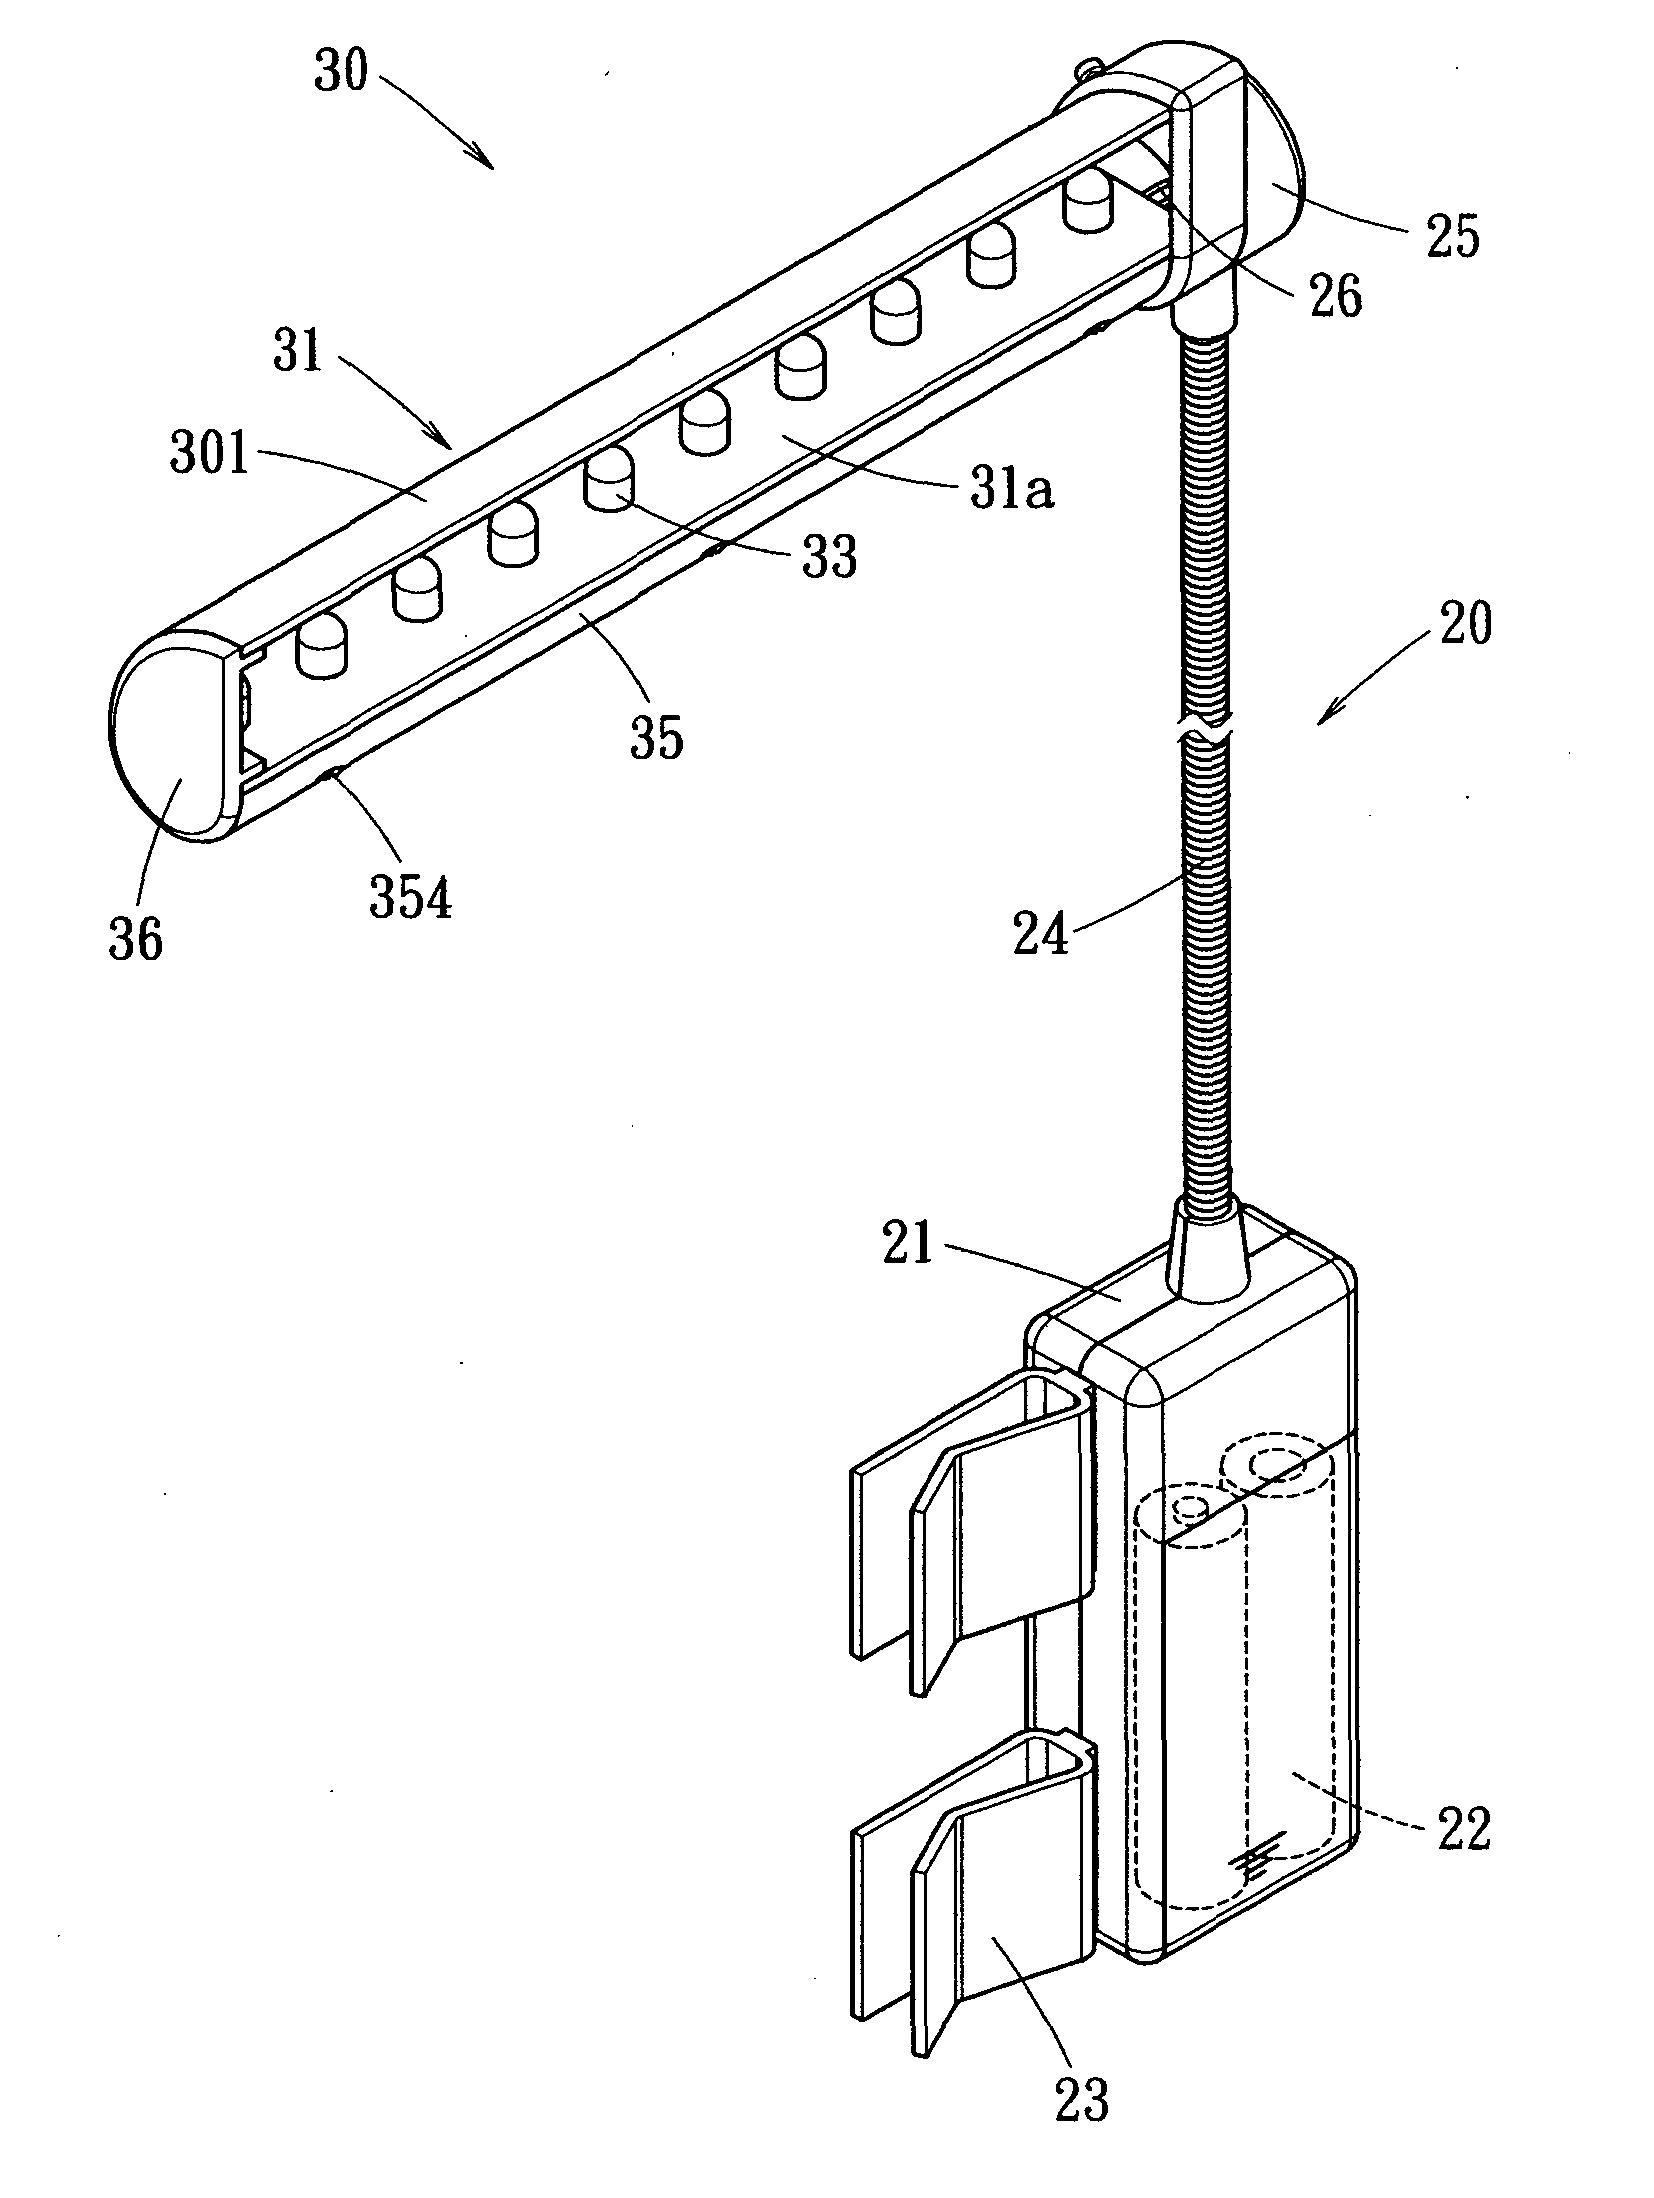 Lamp structure for an electrical device